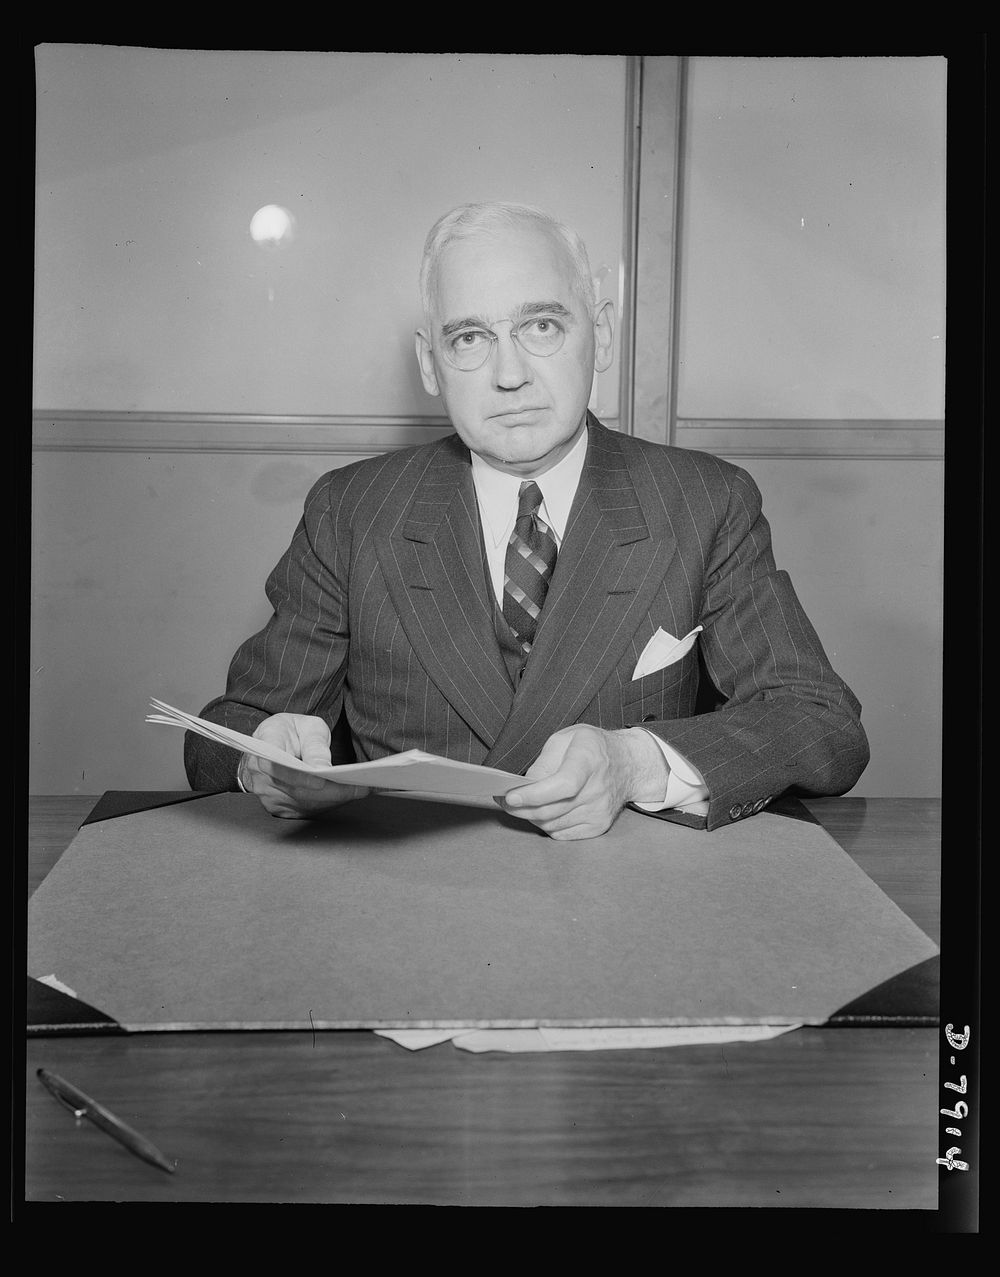 S.J. Dunaway. Sourced from the Library of Congress.